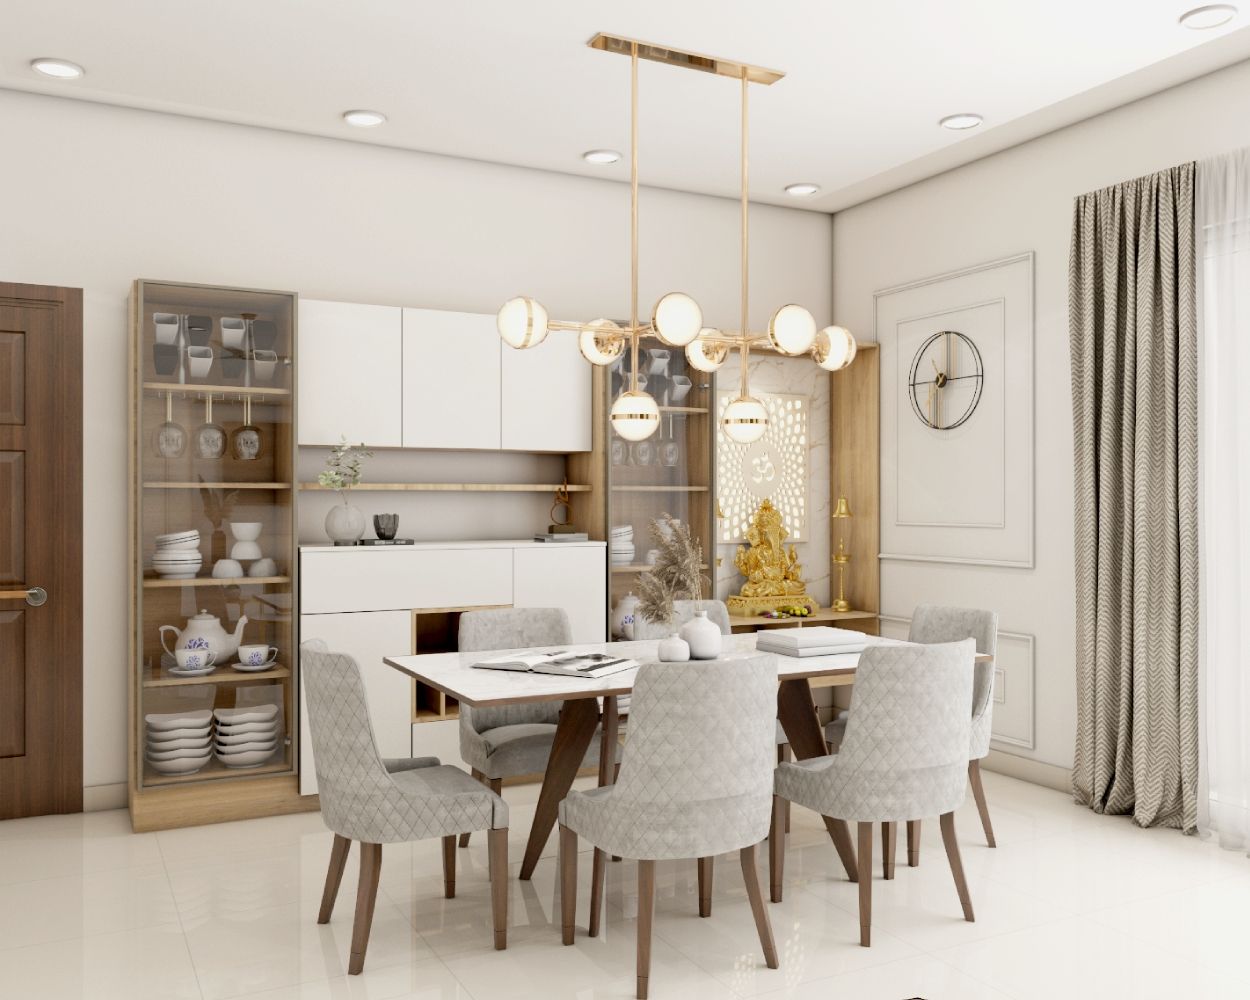 Contemporary 6-Seater White And Wood Dining Room Design With Ornate Chandelier